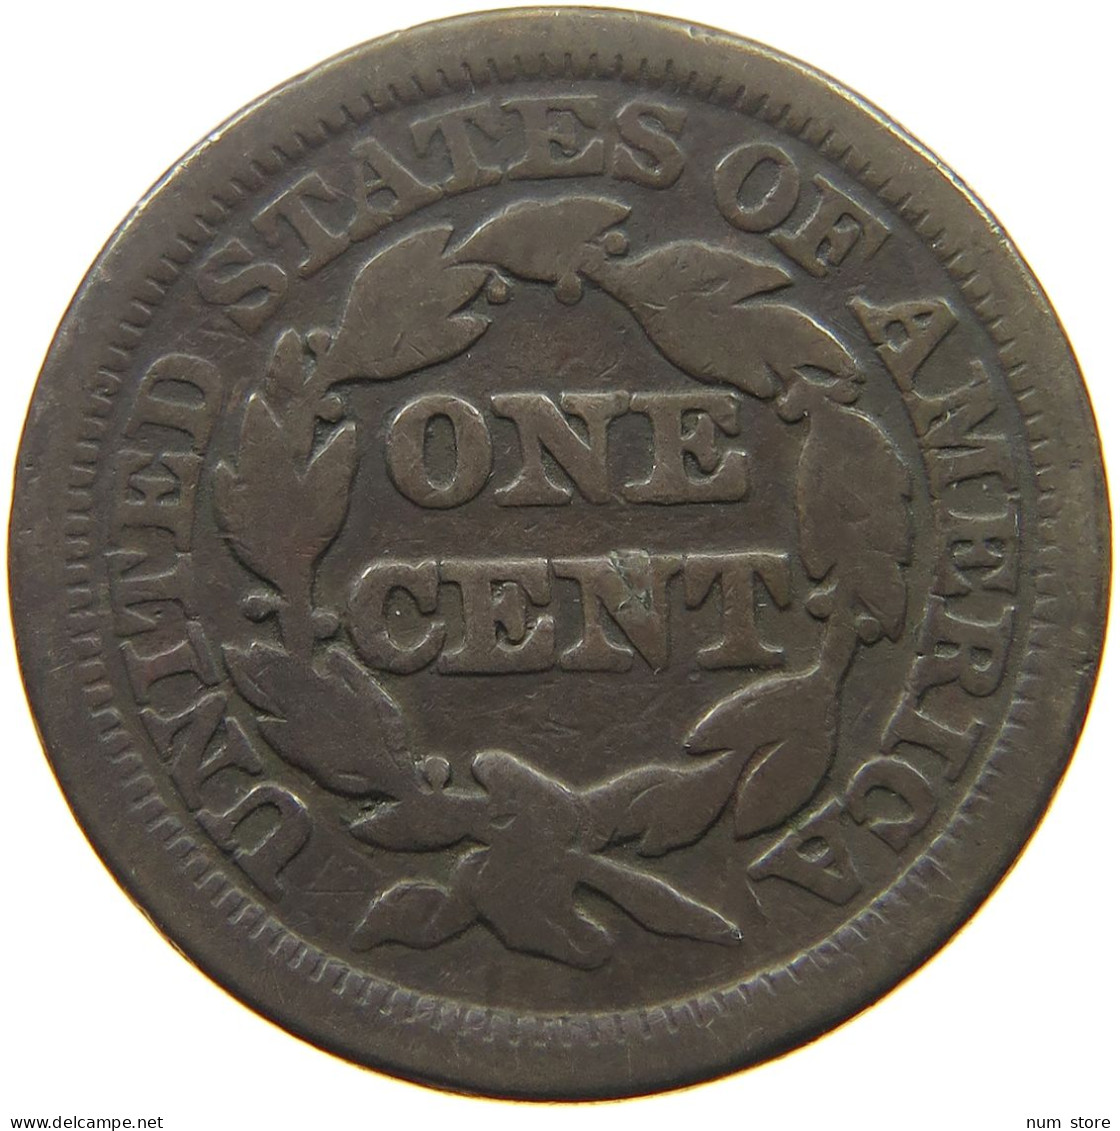 UNITED STATES OF AMERICA LARGE CENT 1845 BRAIDED HAIR #t141 0311 - 1840-1857: Braided Hair